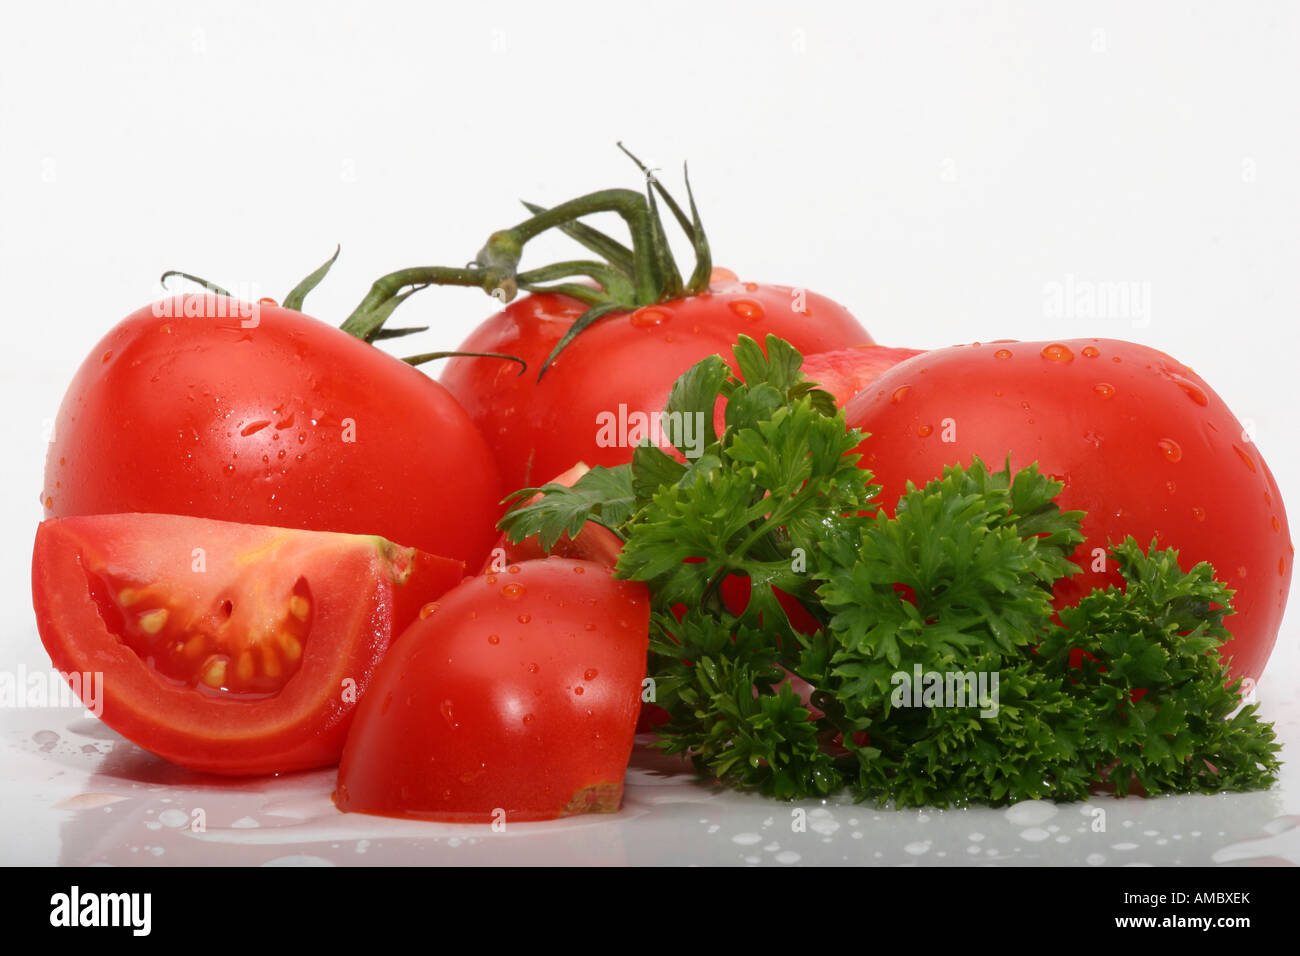 Cross section of organic red tomatoes whole and sliced studio image on ...